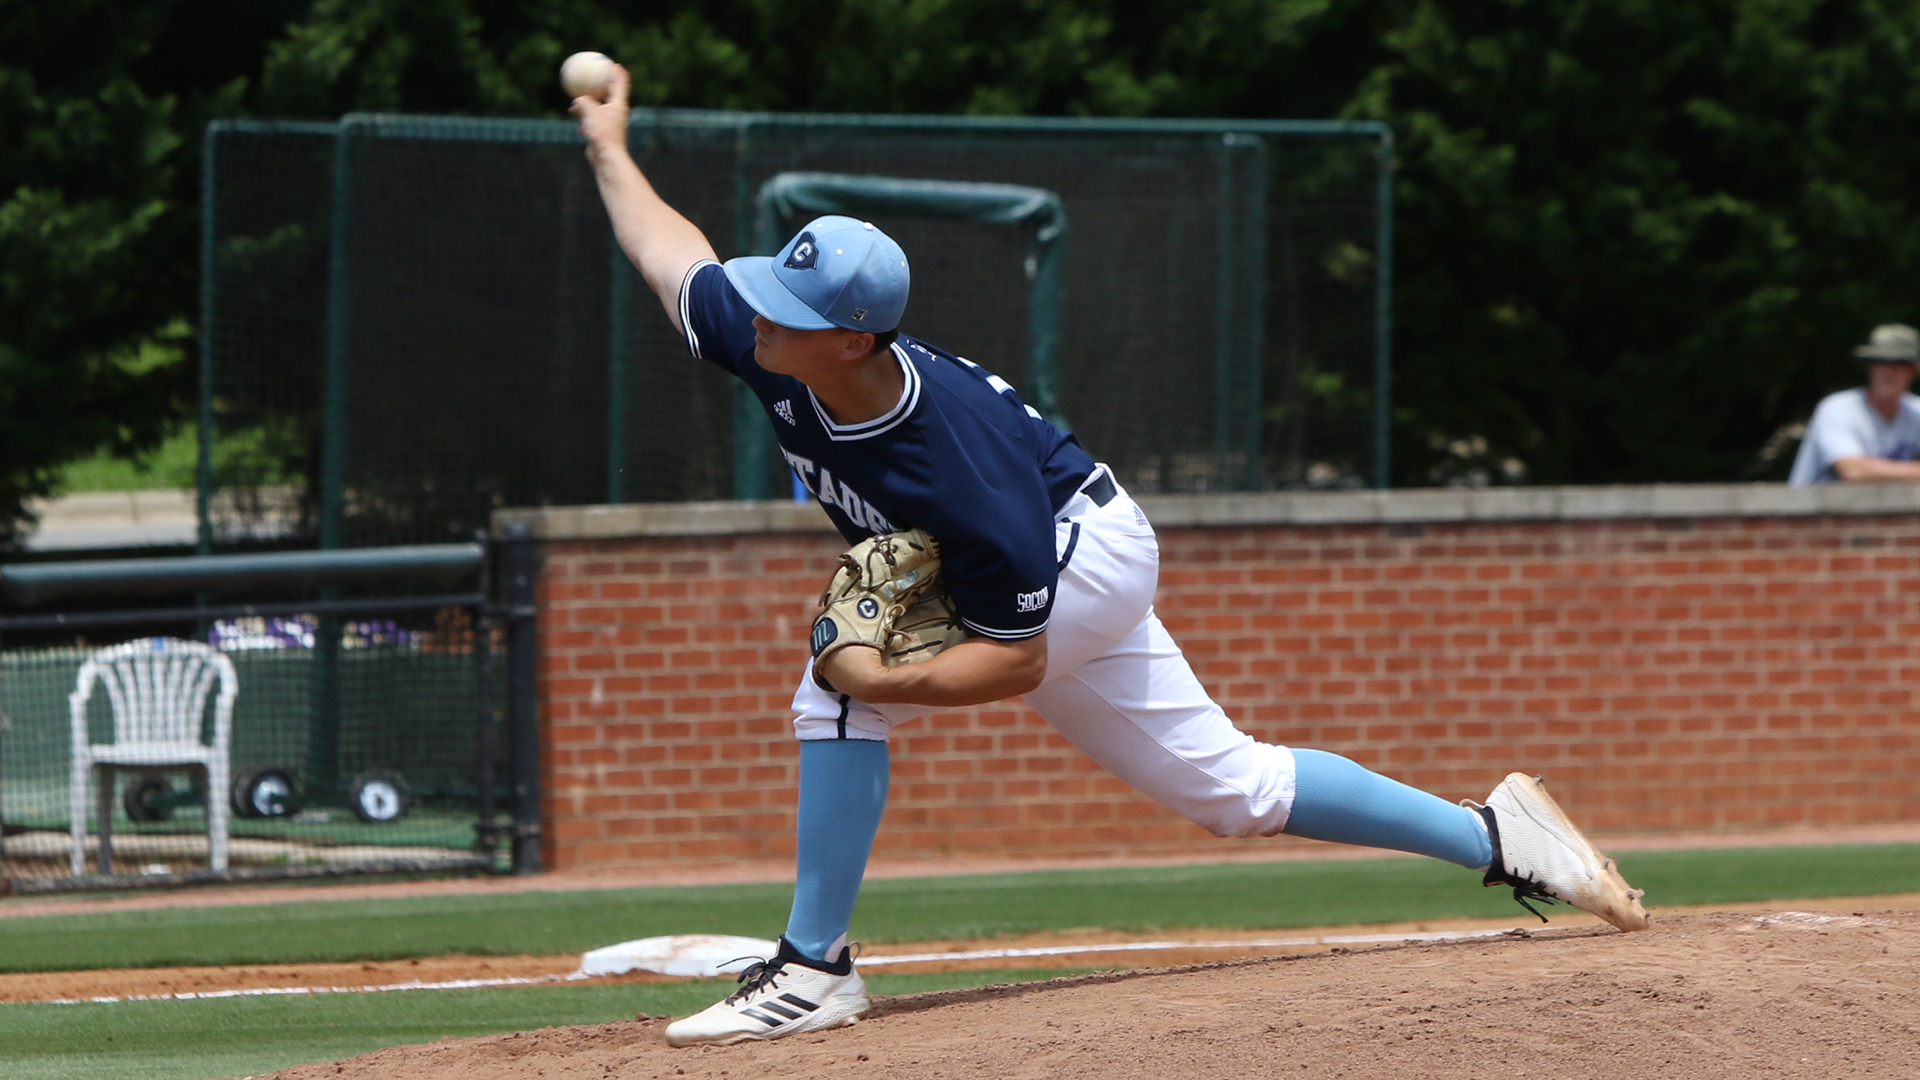 Another Strong Start Gives Dogs Series Win The Citadel Athletics